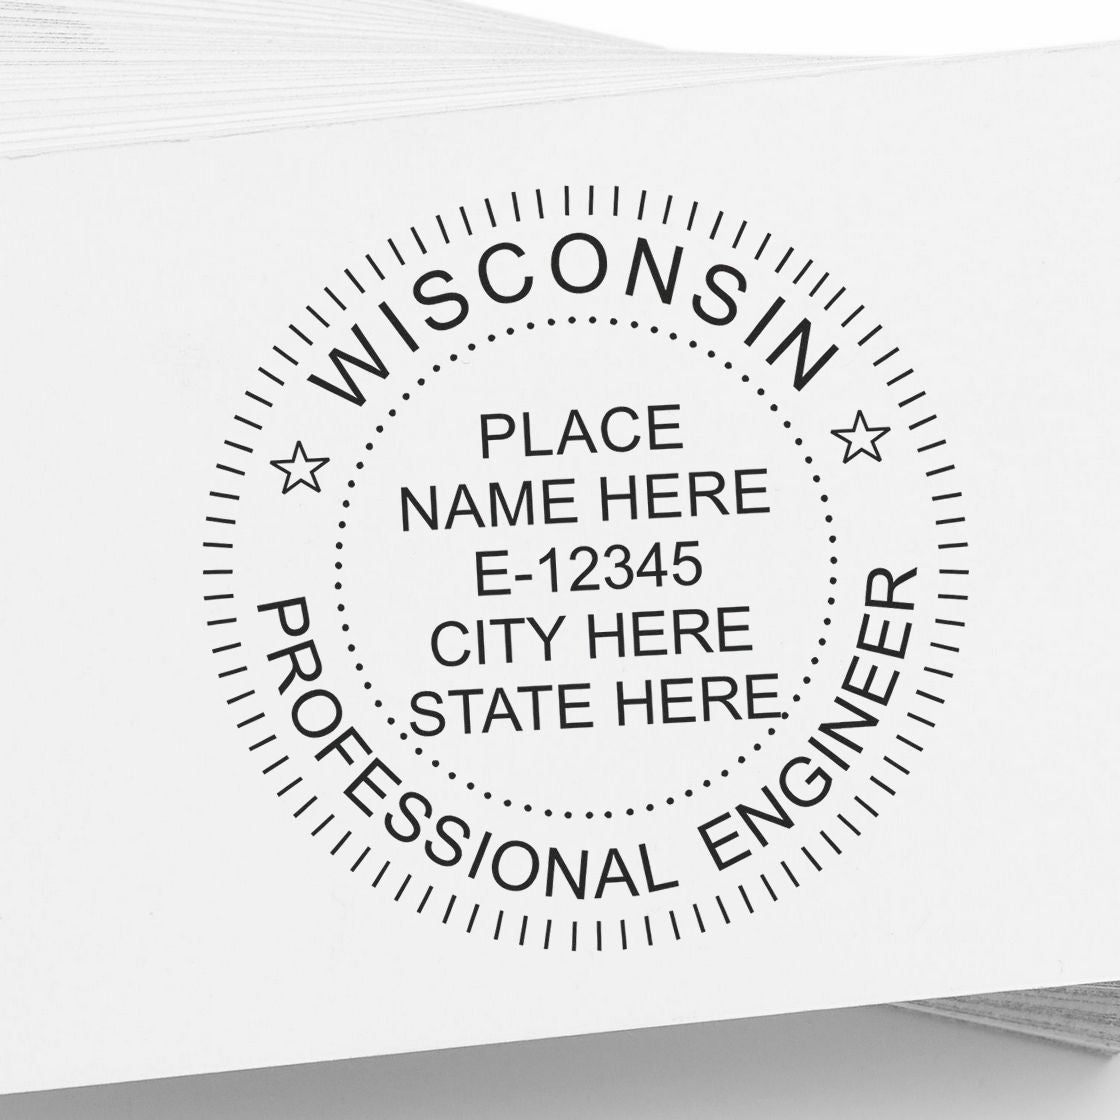 The main image for the Digital Wisconsin PE Stamp and Electronic Seal for Wisconsin Engineer depicting a sample of the imprint and electronic files